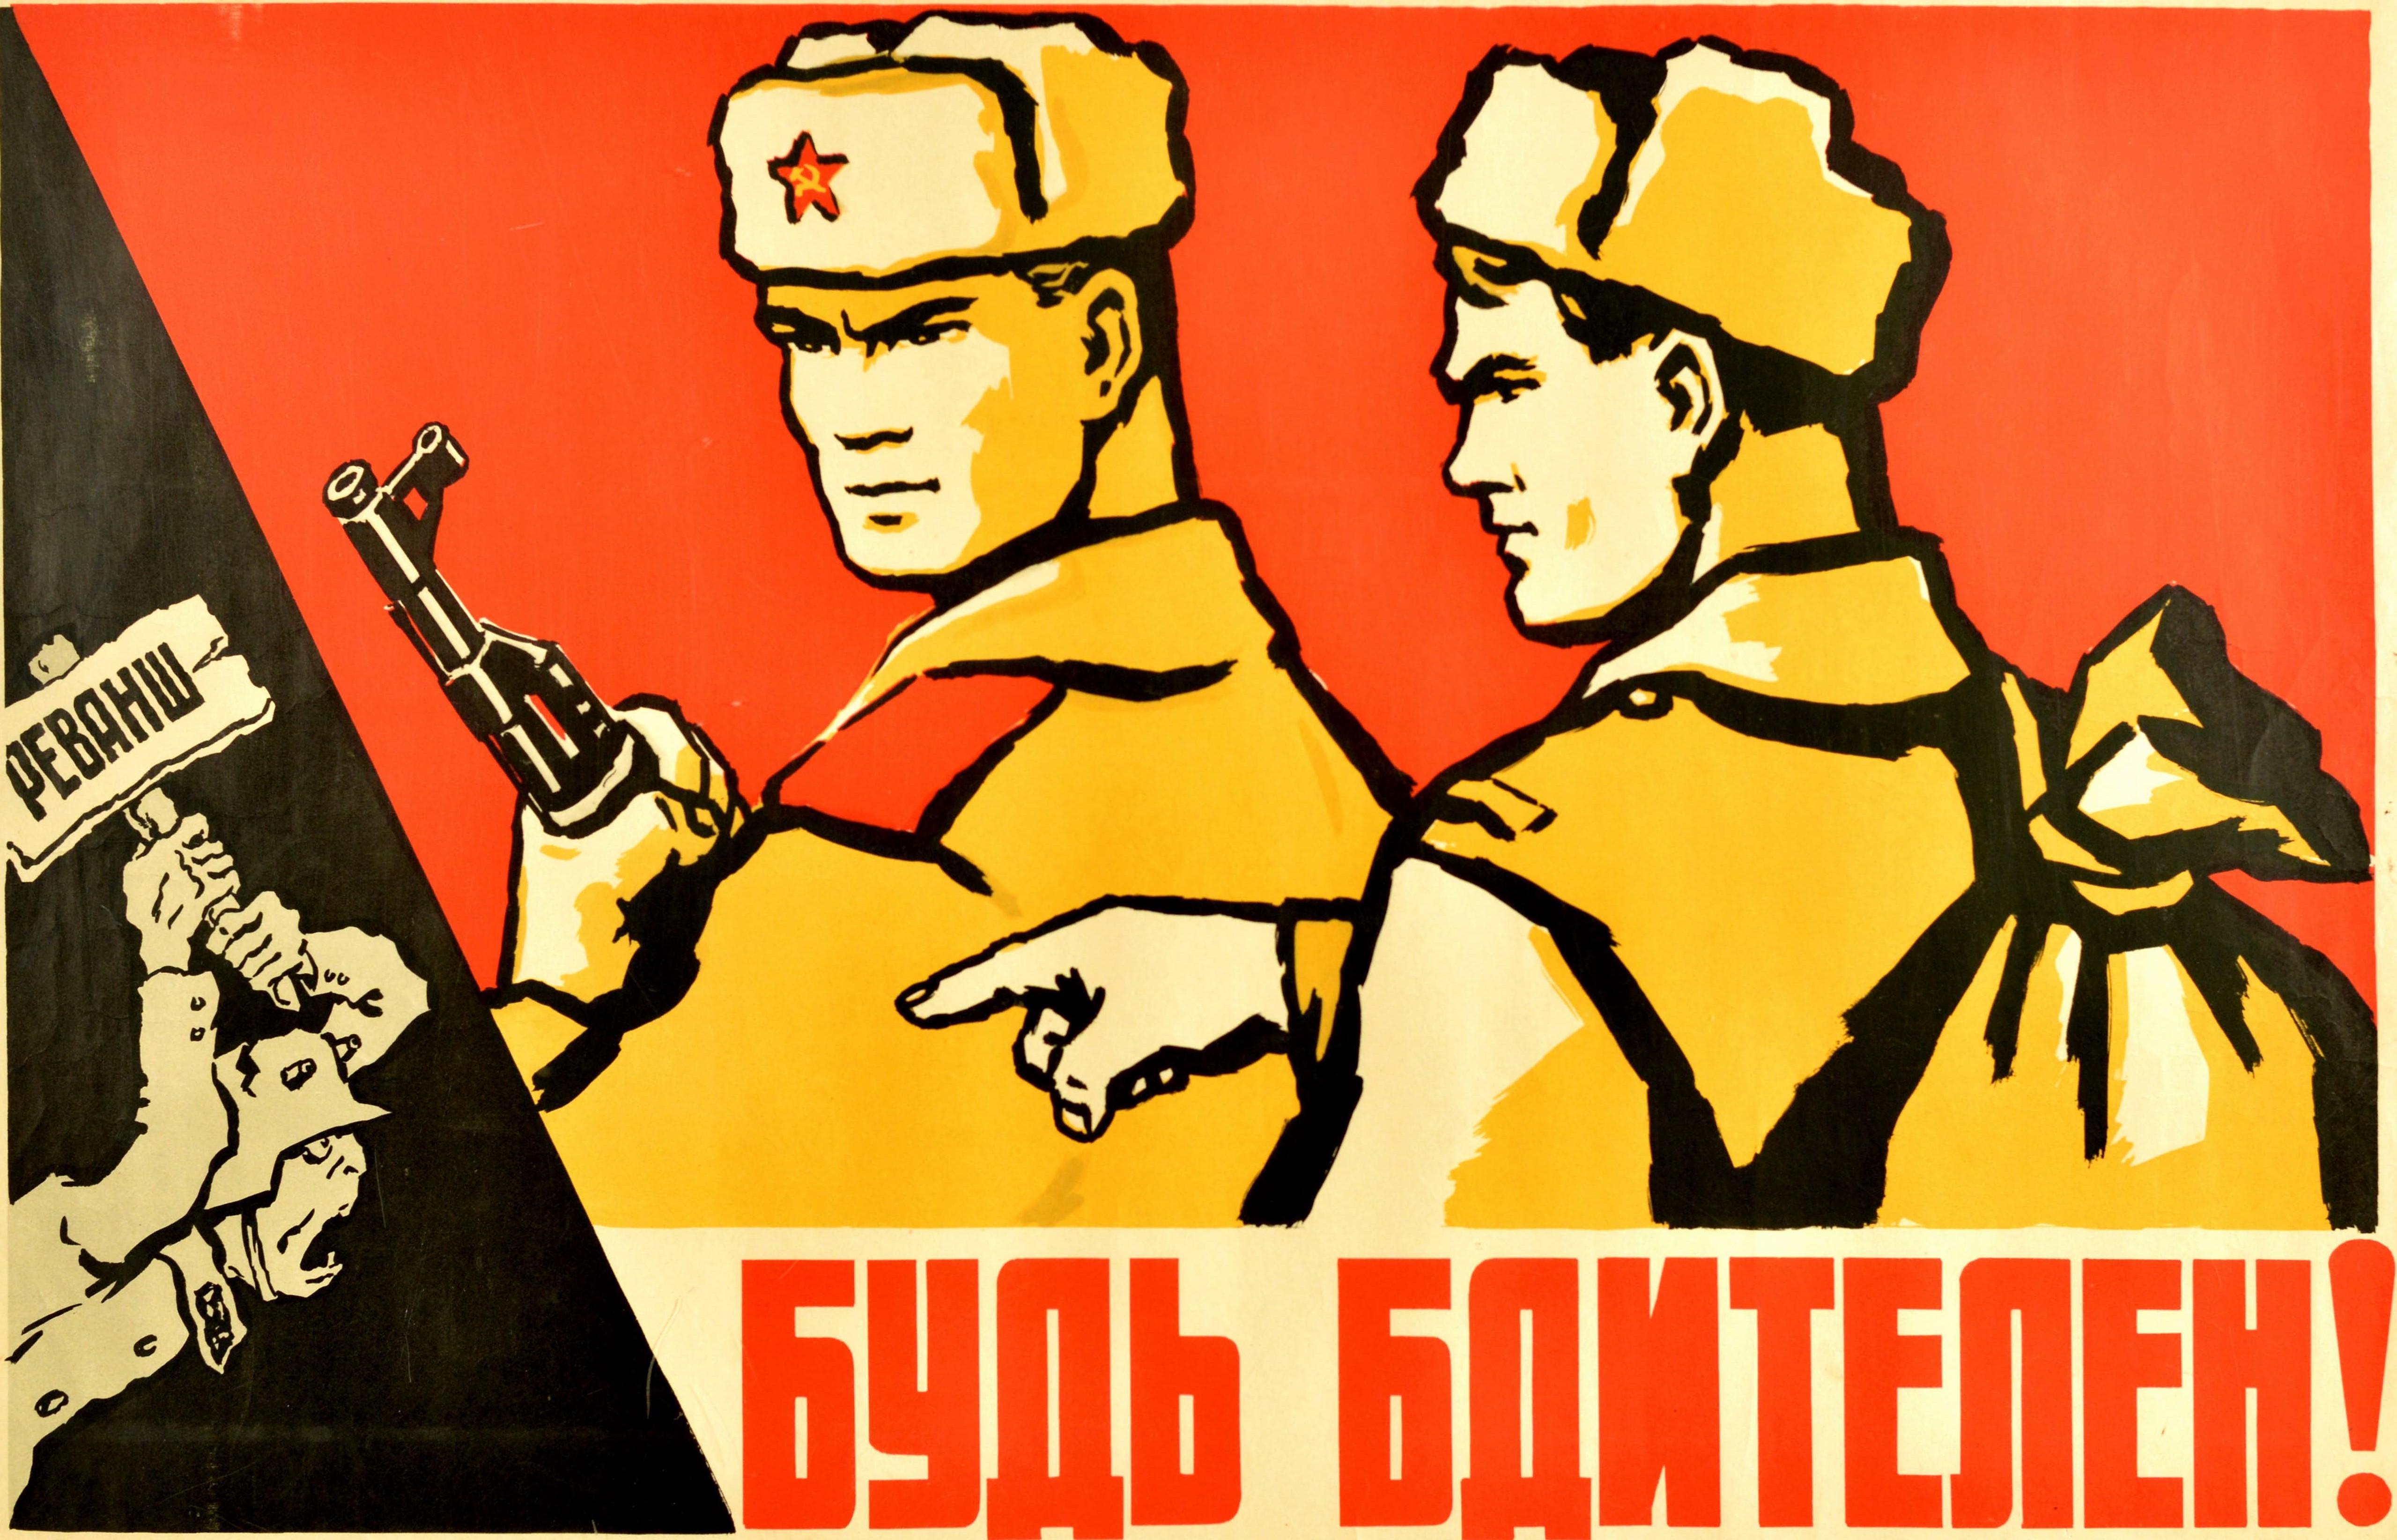 Original vintage Soviet propaganda poster - Be On Guard! - featuring two soldiers in uniform against a red background with a hammer and sickle on a red star showing on the hat of the one holding an AK-47 rifle gun as the the other points to a black